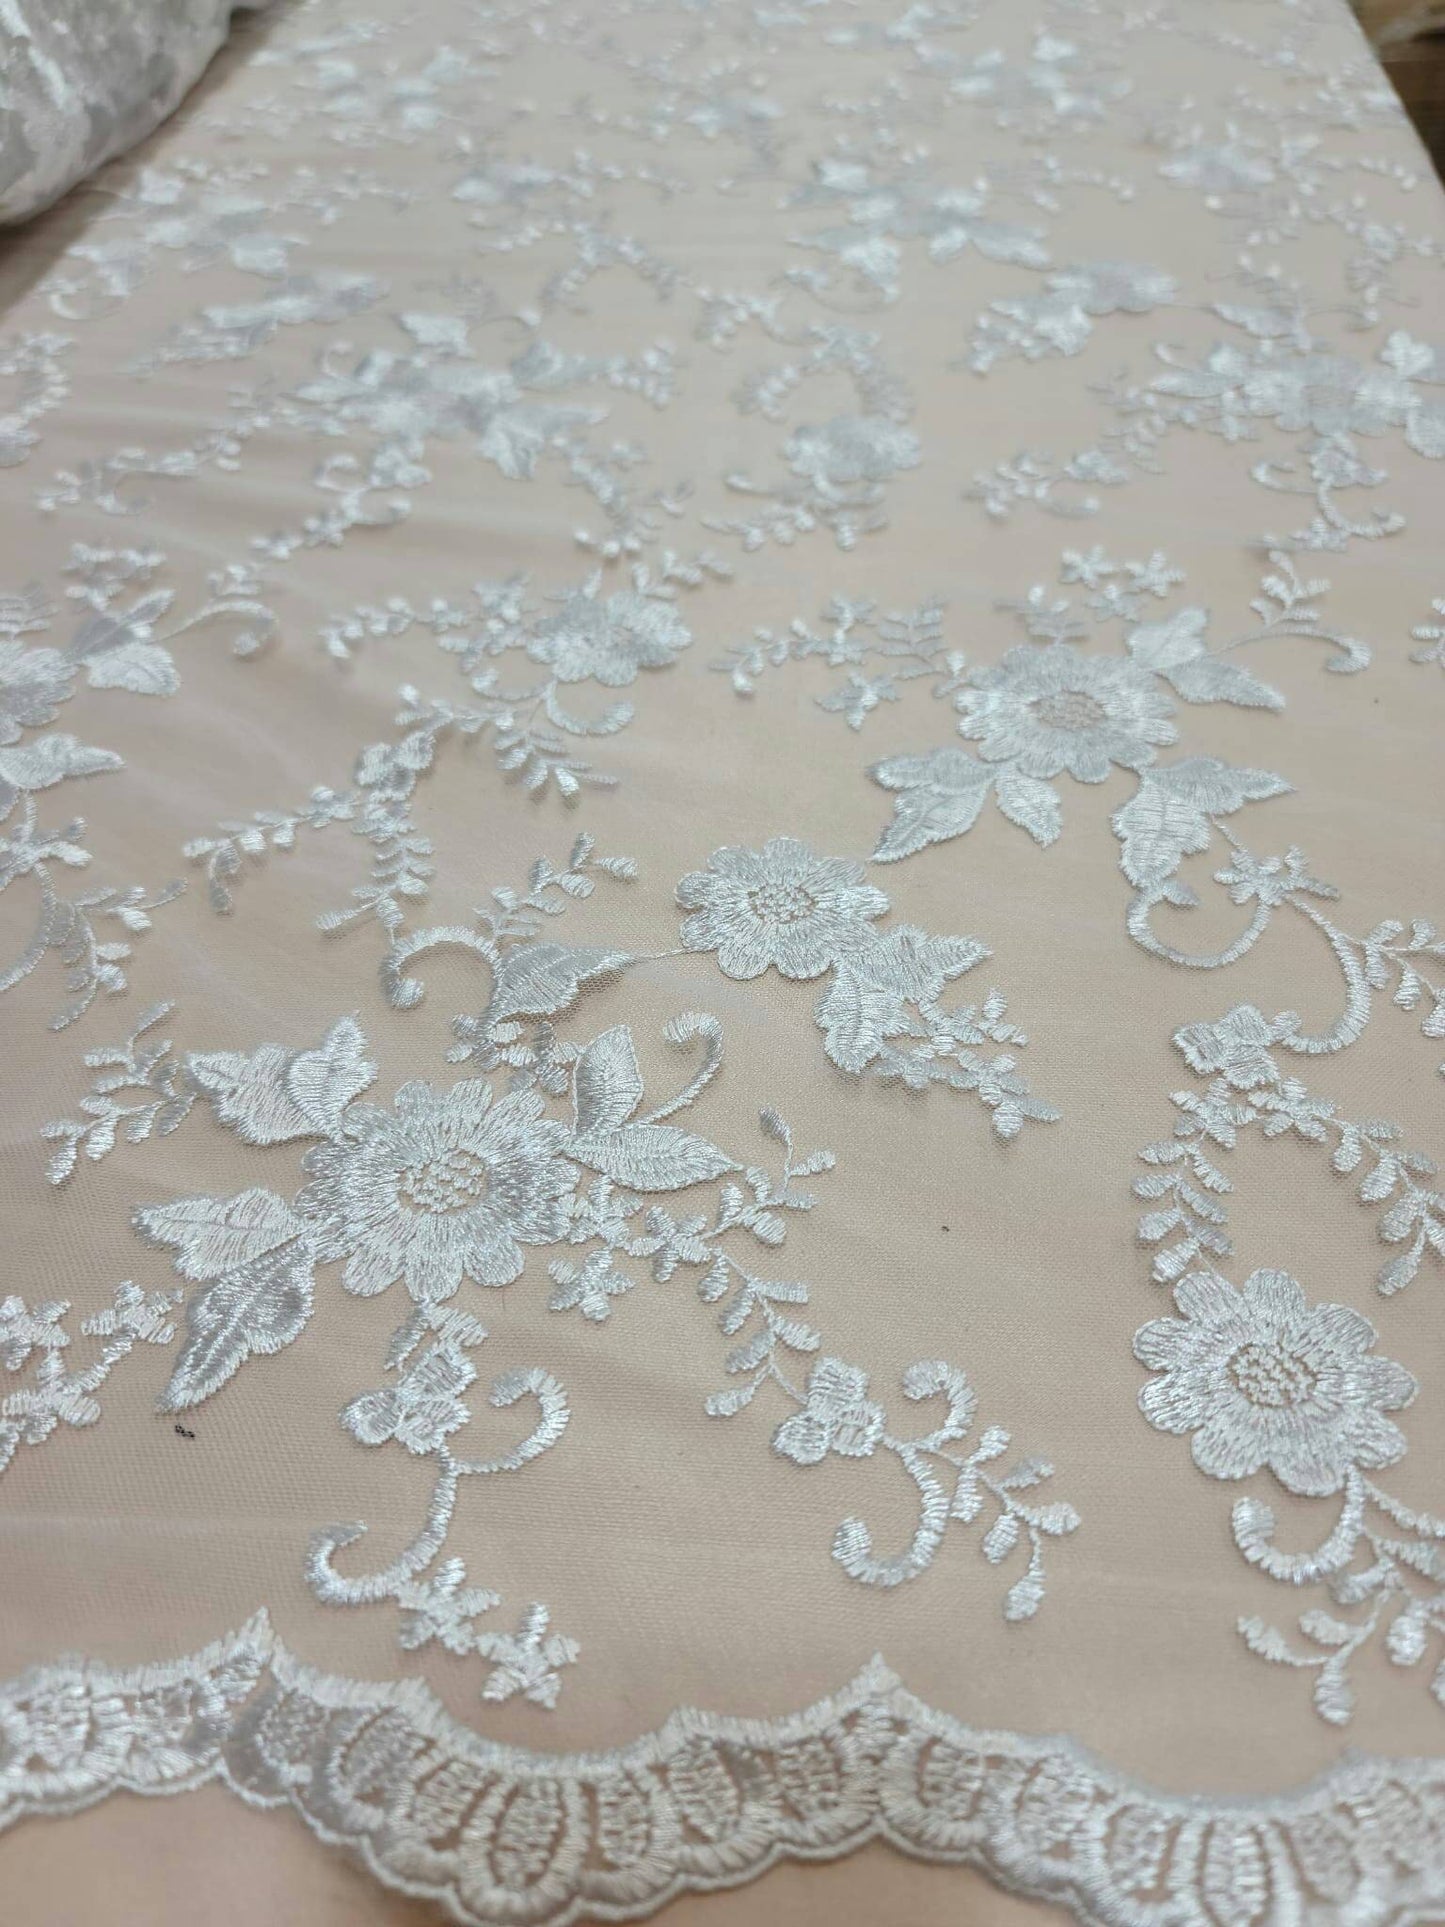 White Lace Embroidery Floral Flowers Fabric By The Yard Gown Bridal Evening Dress Double Scalloped Wedding Lace